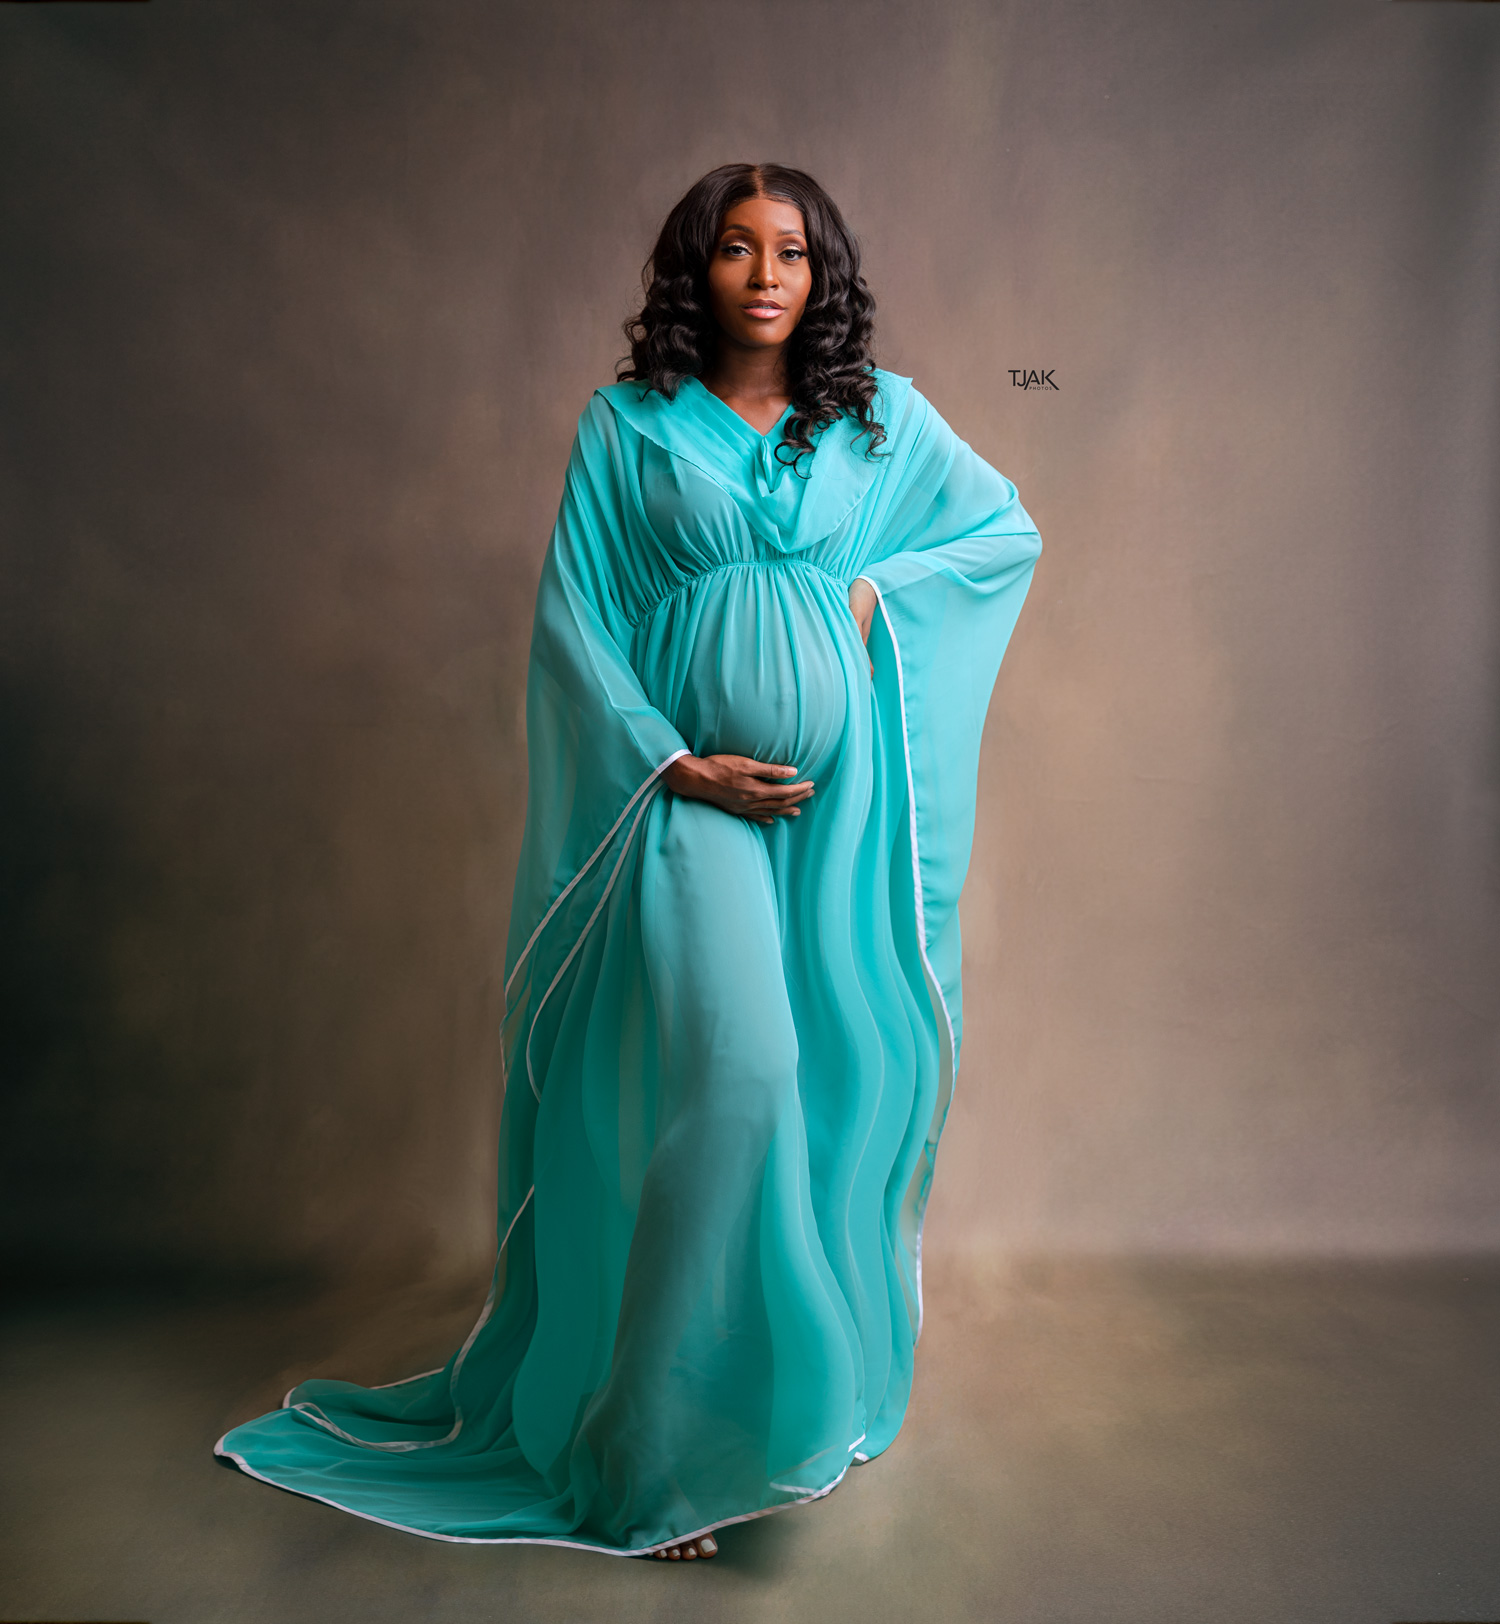 Maternity photoshoot of a woman in a turquoise see through pregnancy dress in a studio in Laurel MD near Savage in Howard County Maryland